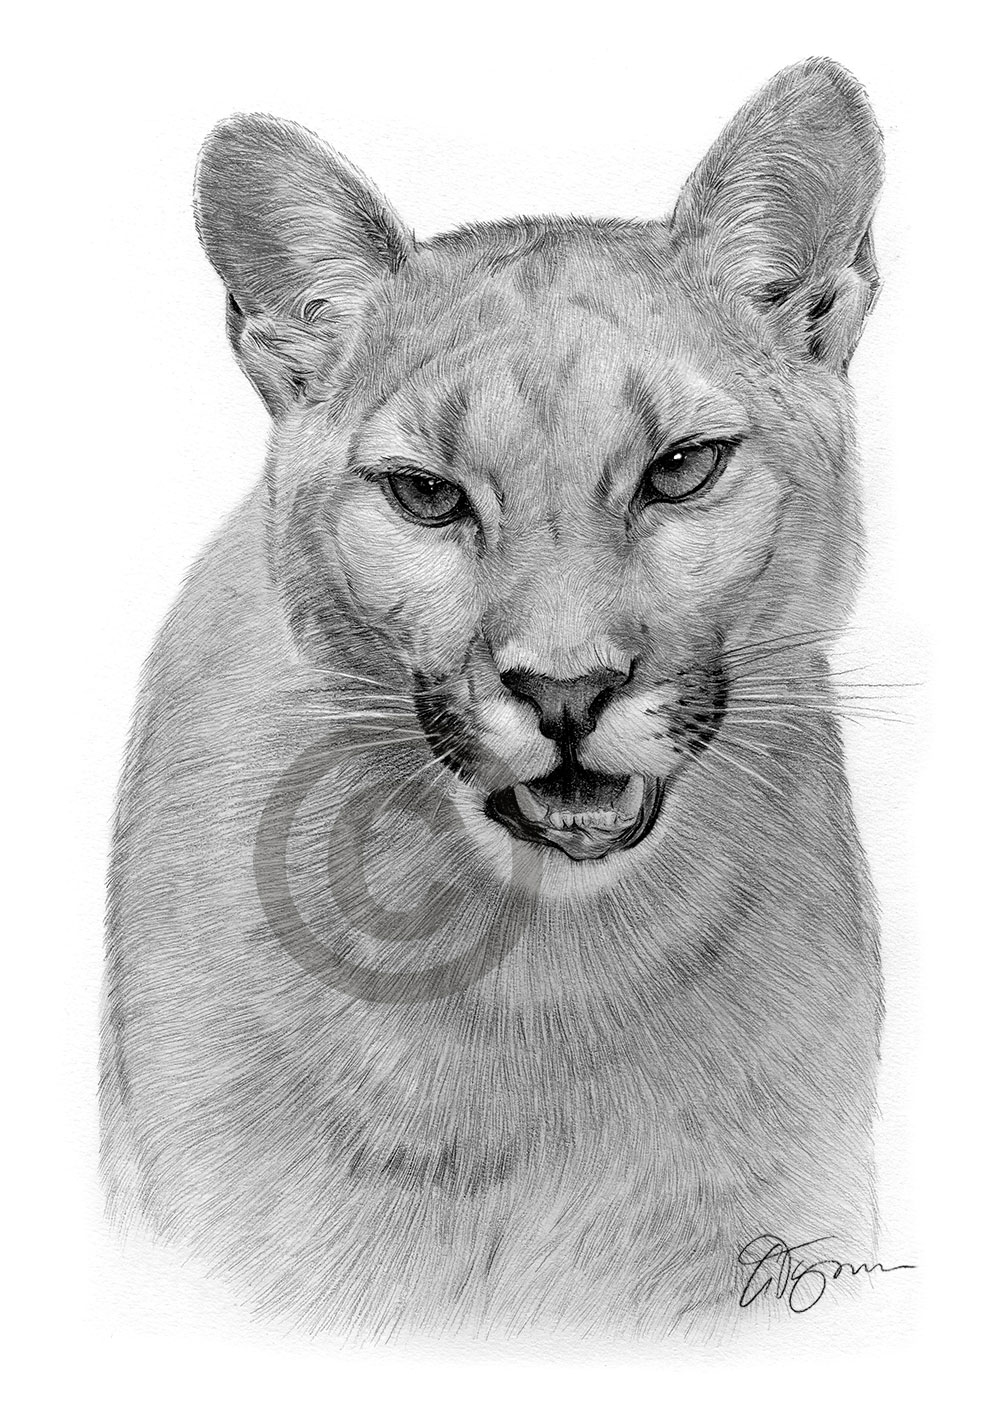 Pencil drawing of an adult cougar by UK artist Gary Tymon